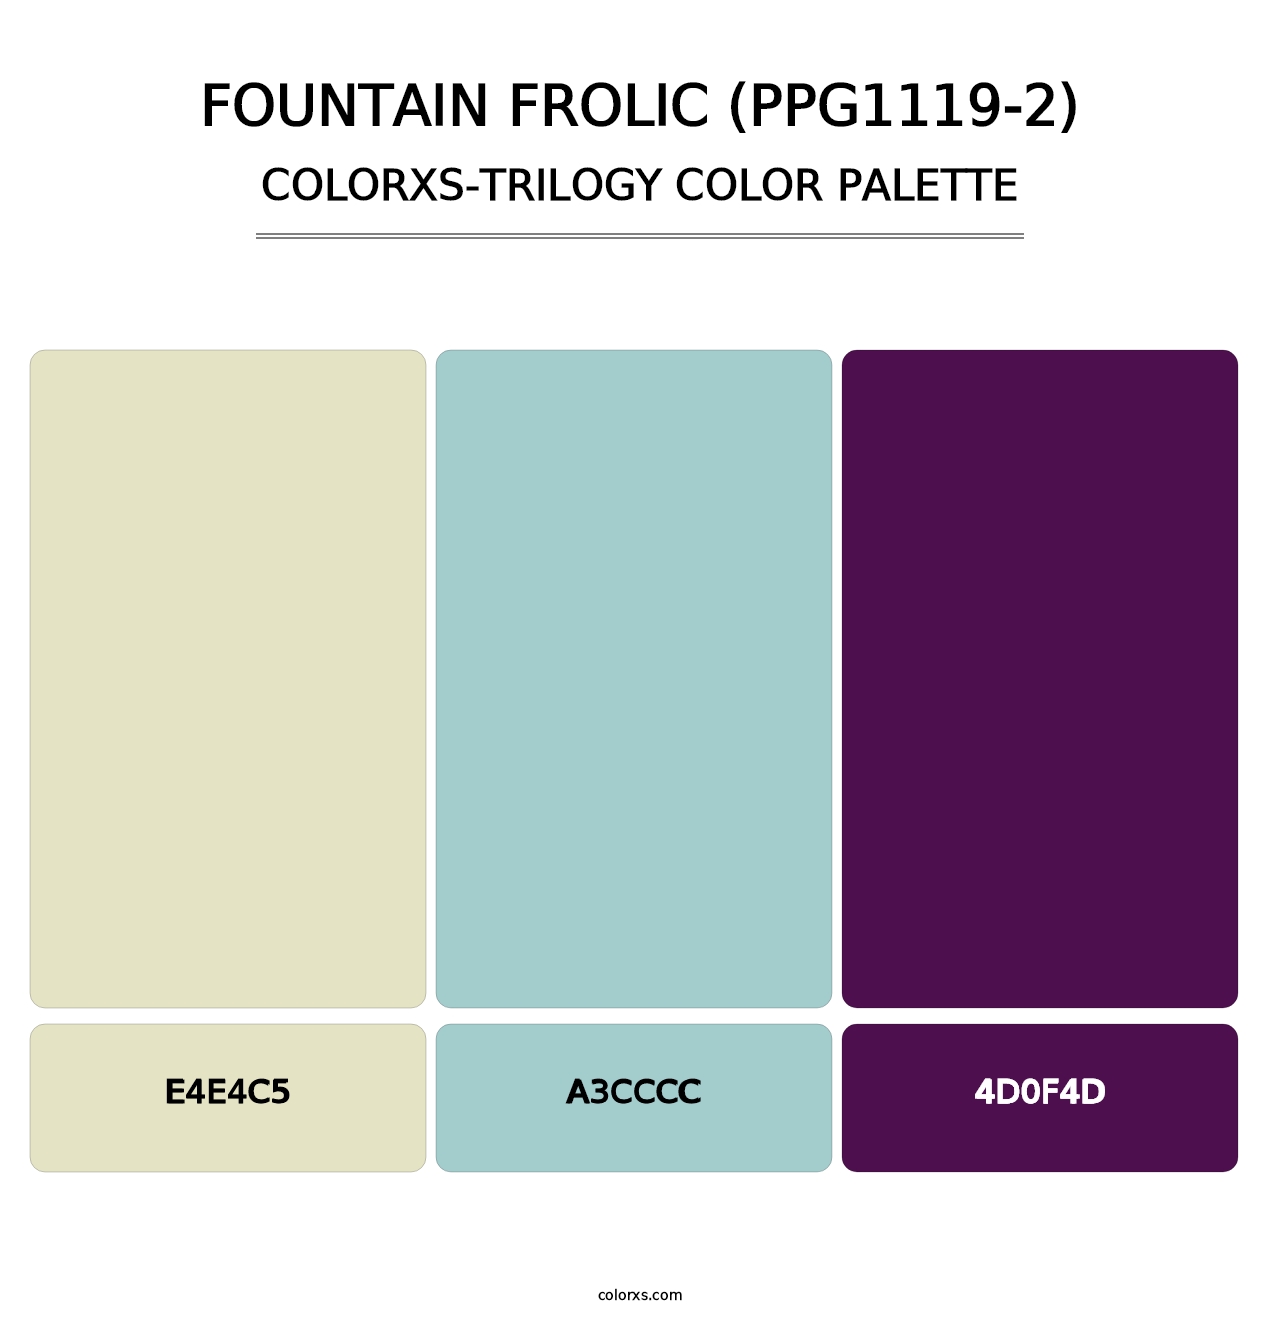 Fountain Frolic (PPG1119-2) - Colorxs Trilogy Palette